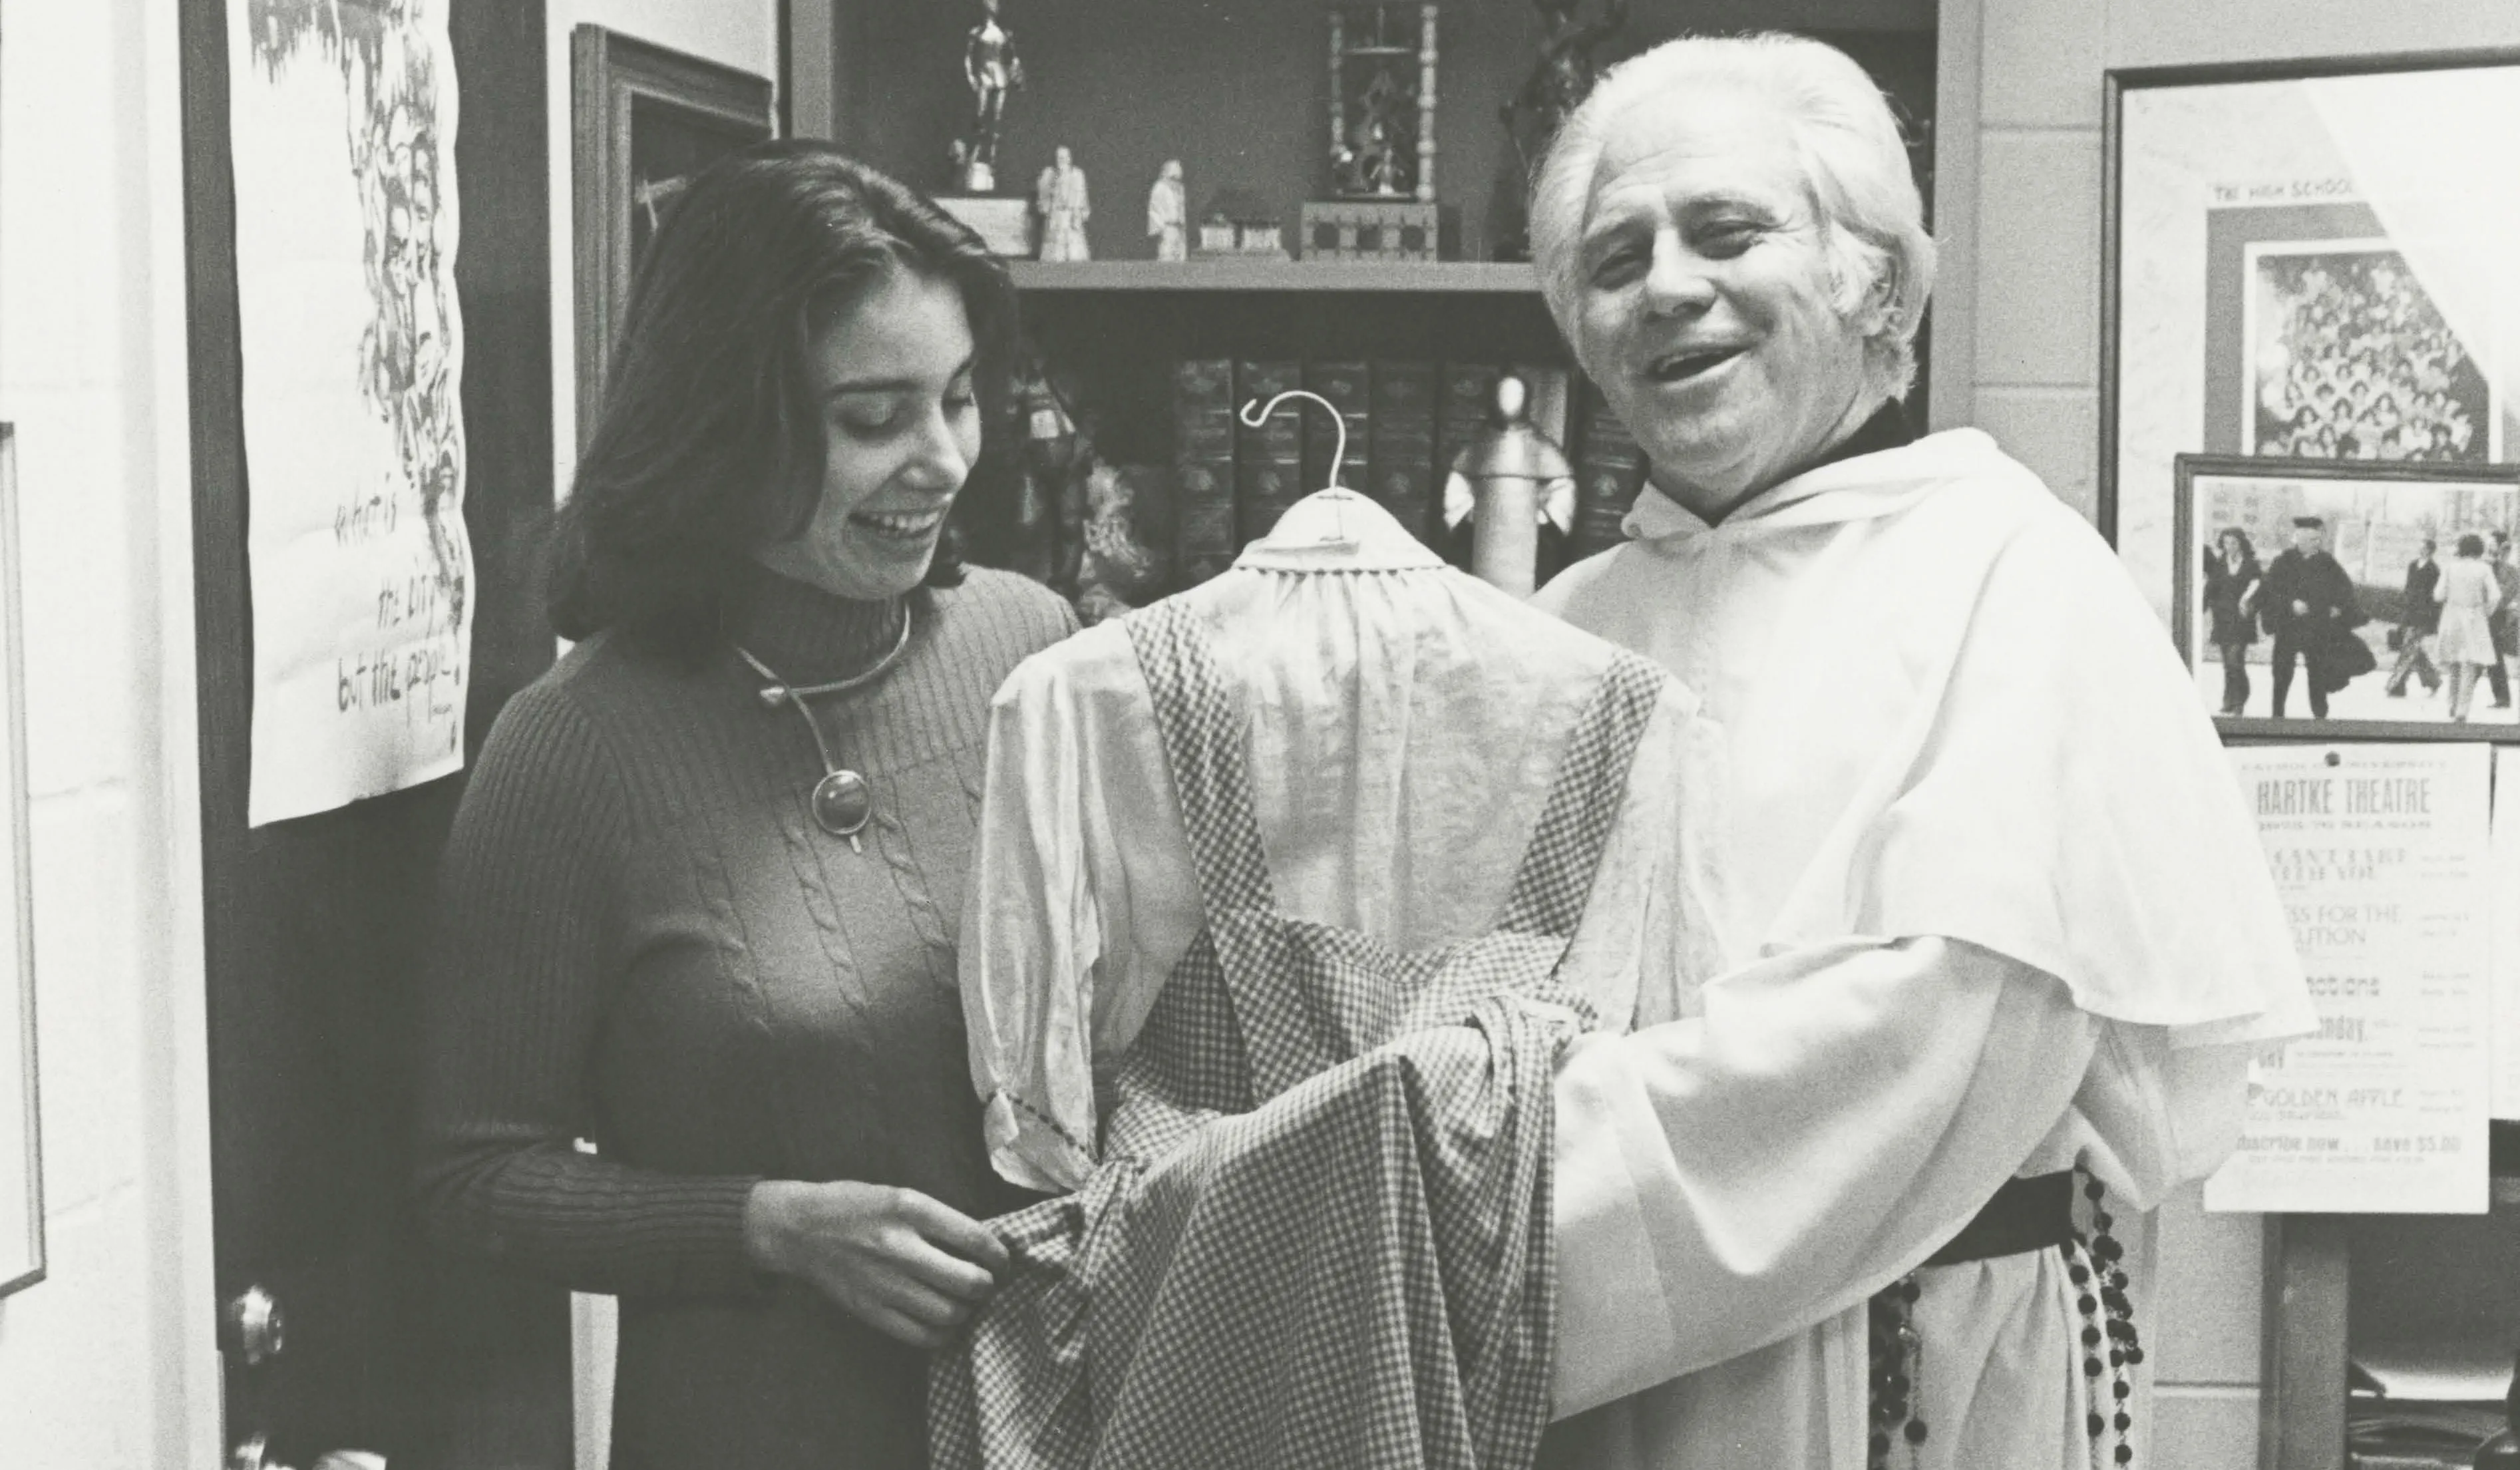 Fr. Gilbert Hatke holds a dress gifted to him that Judy Garland wore as Dorothy Gale in the 1939 film ‘The Wizard of Oz’. Courtesy of The Catholic University of America.